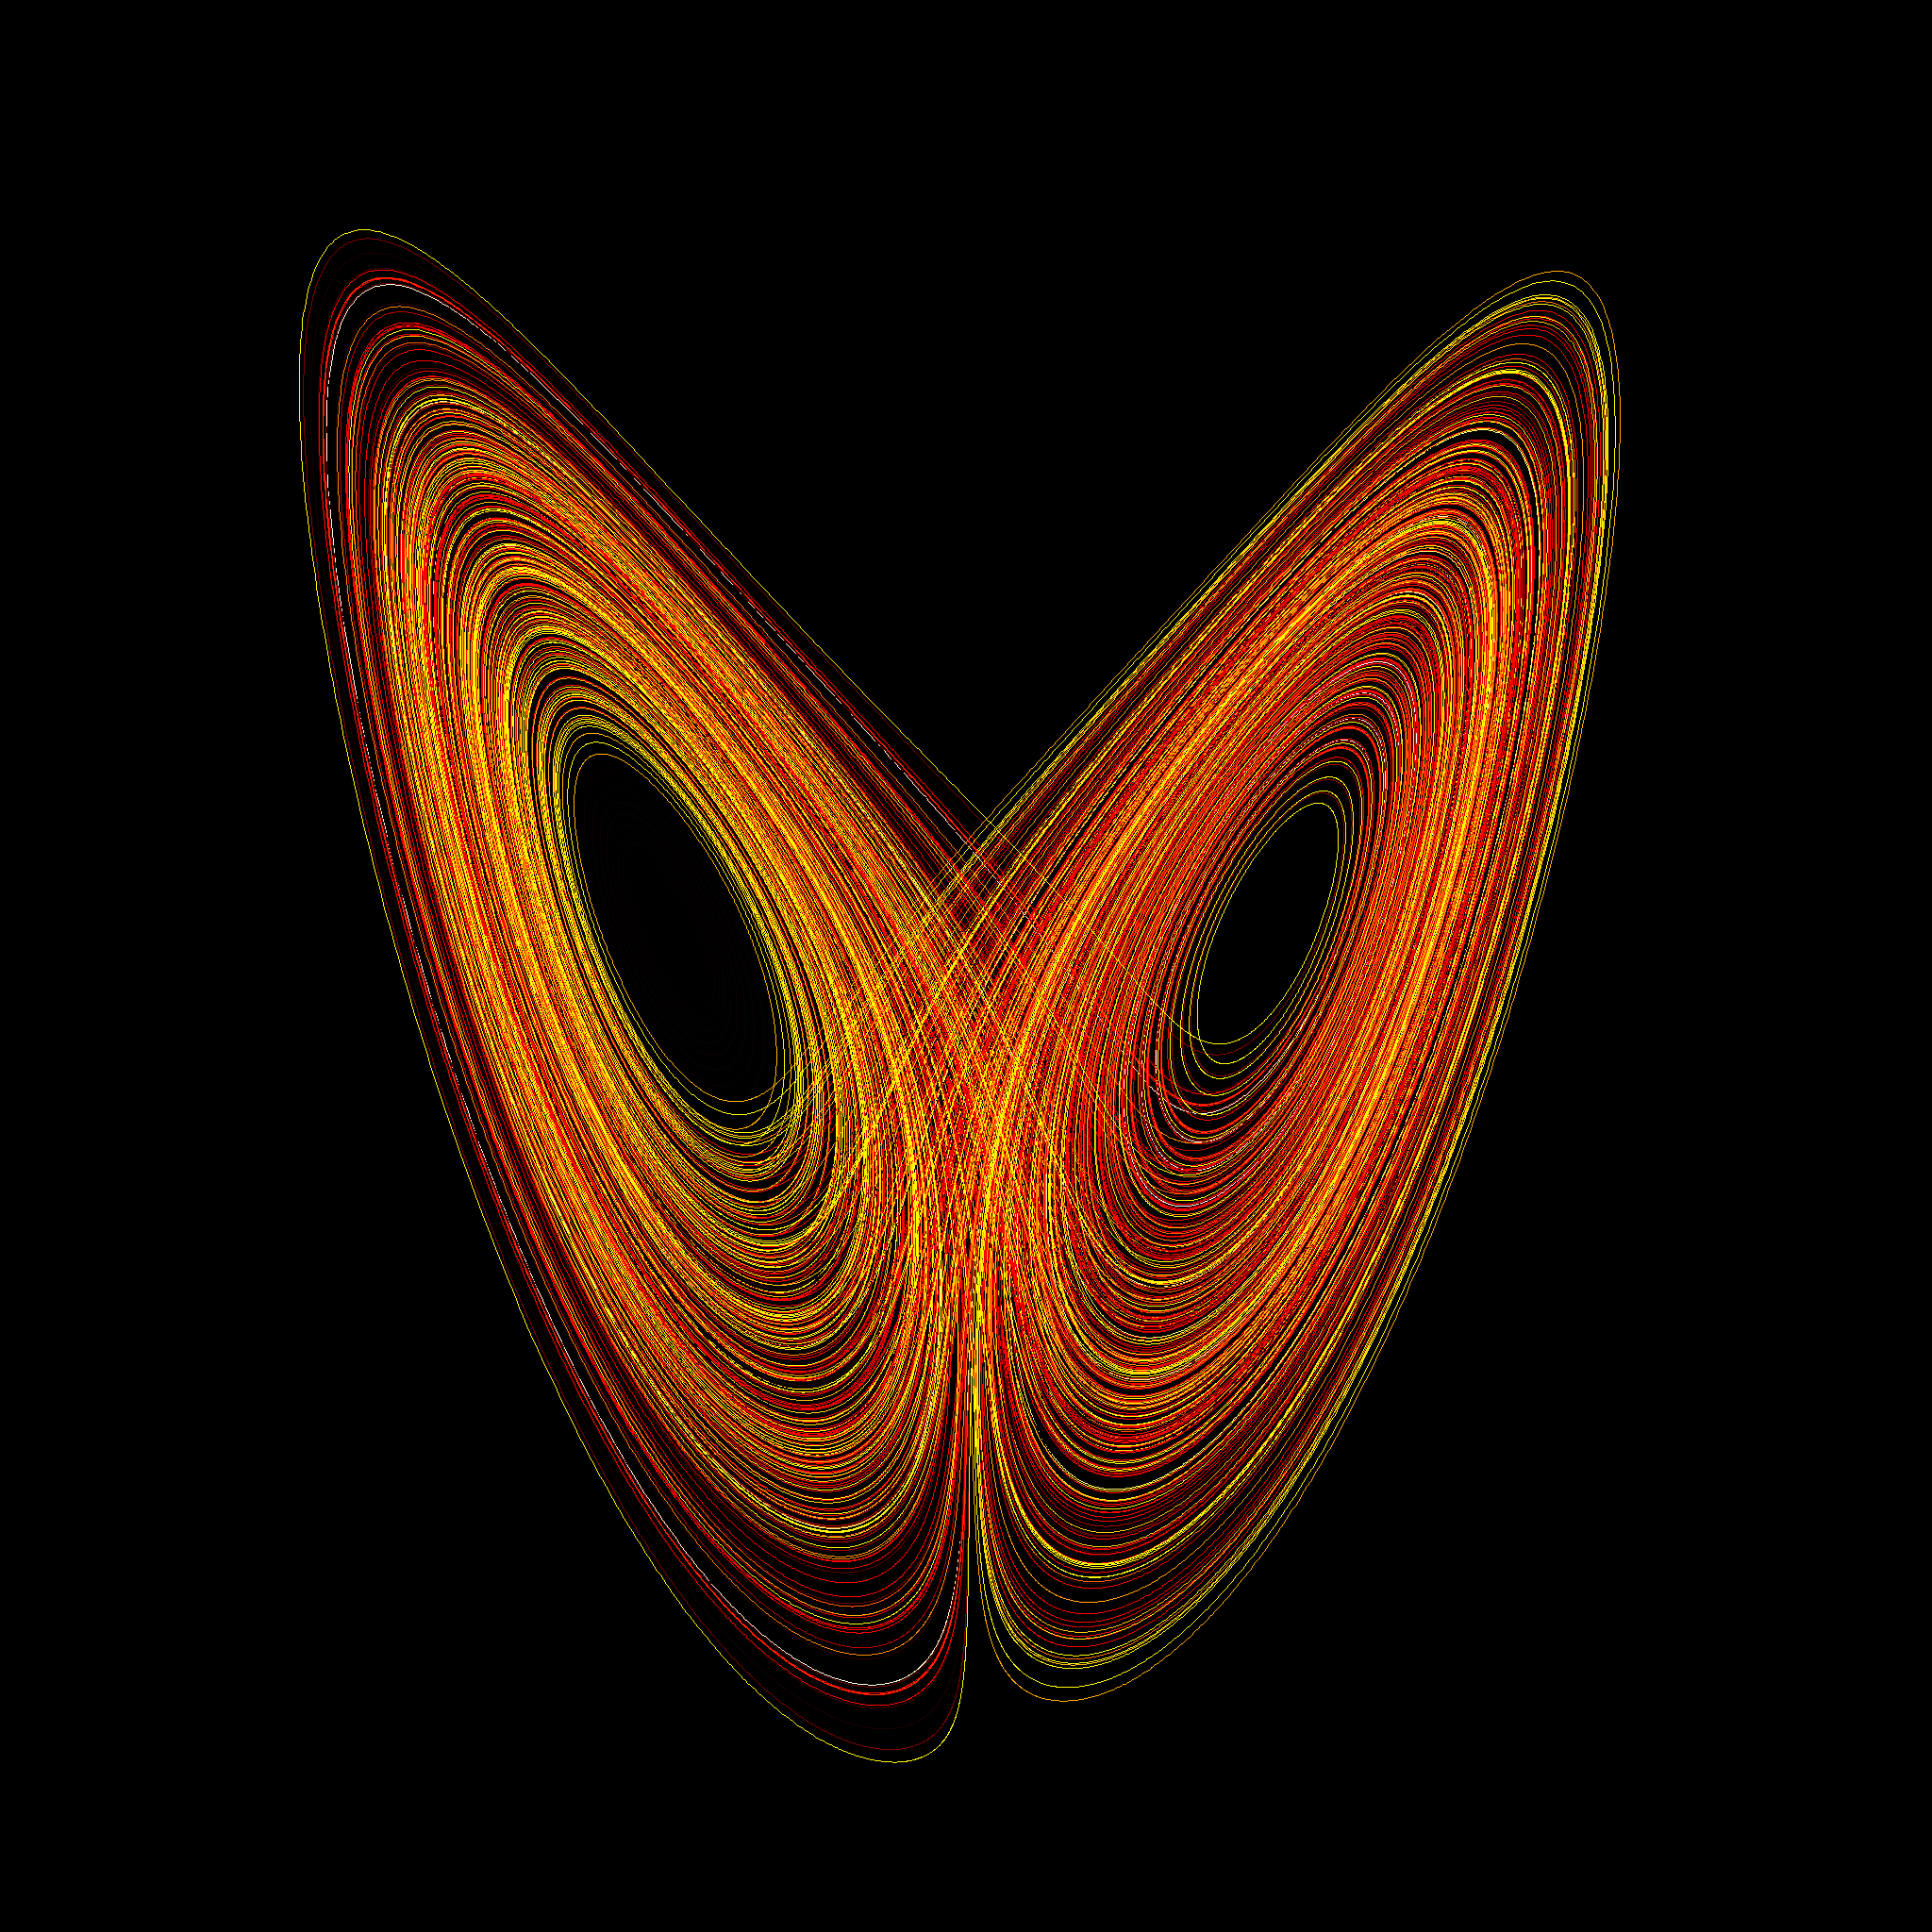 The Lorenz attractor, generated by a simplified version of the equations that sparked the discovery of modern chaos theory.